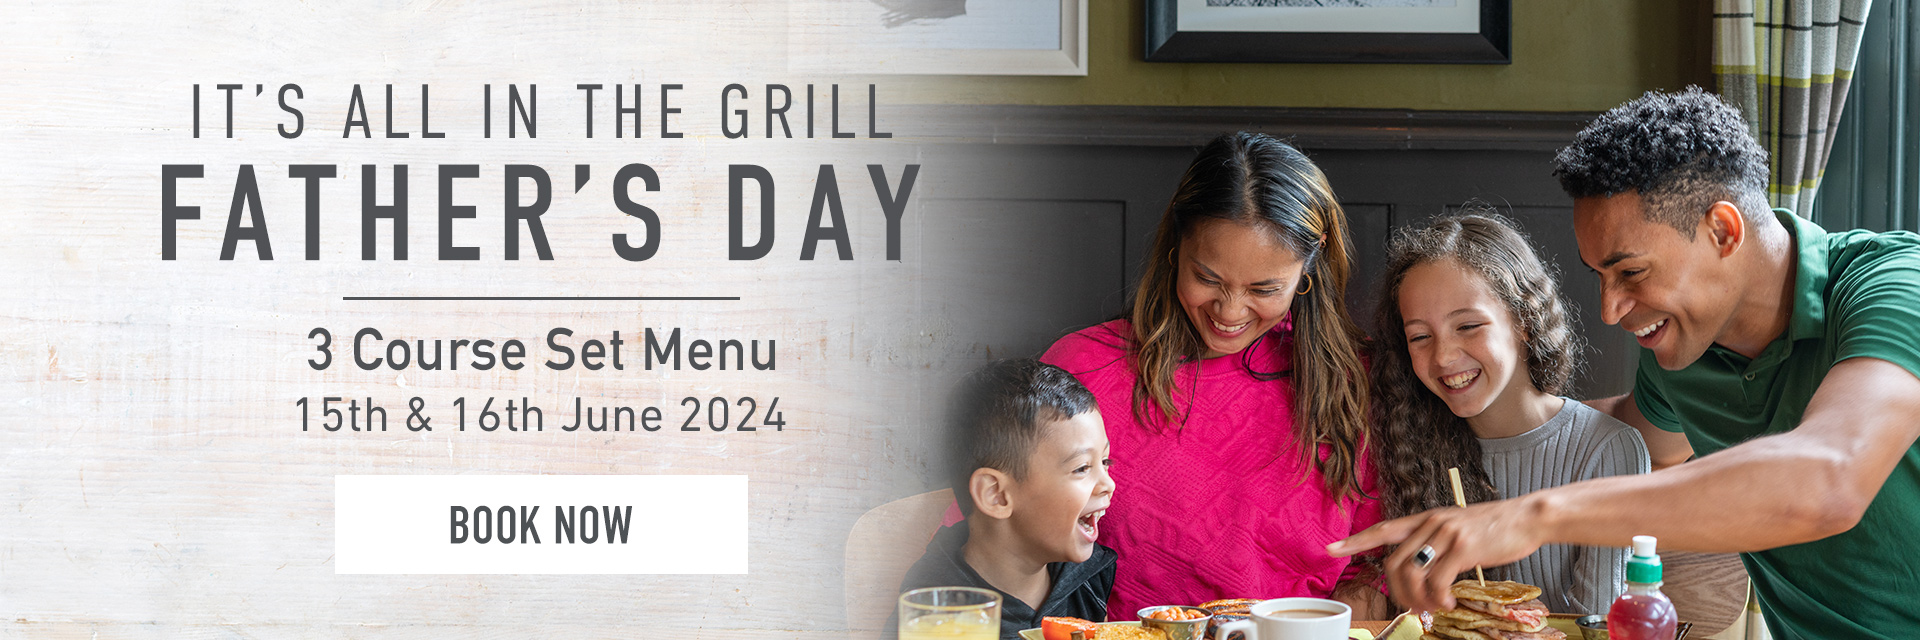 Father’s Day at Harvester Port Solent